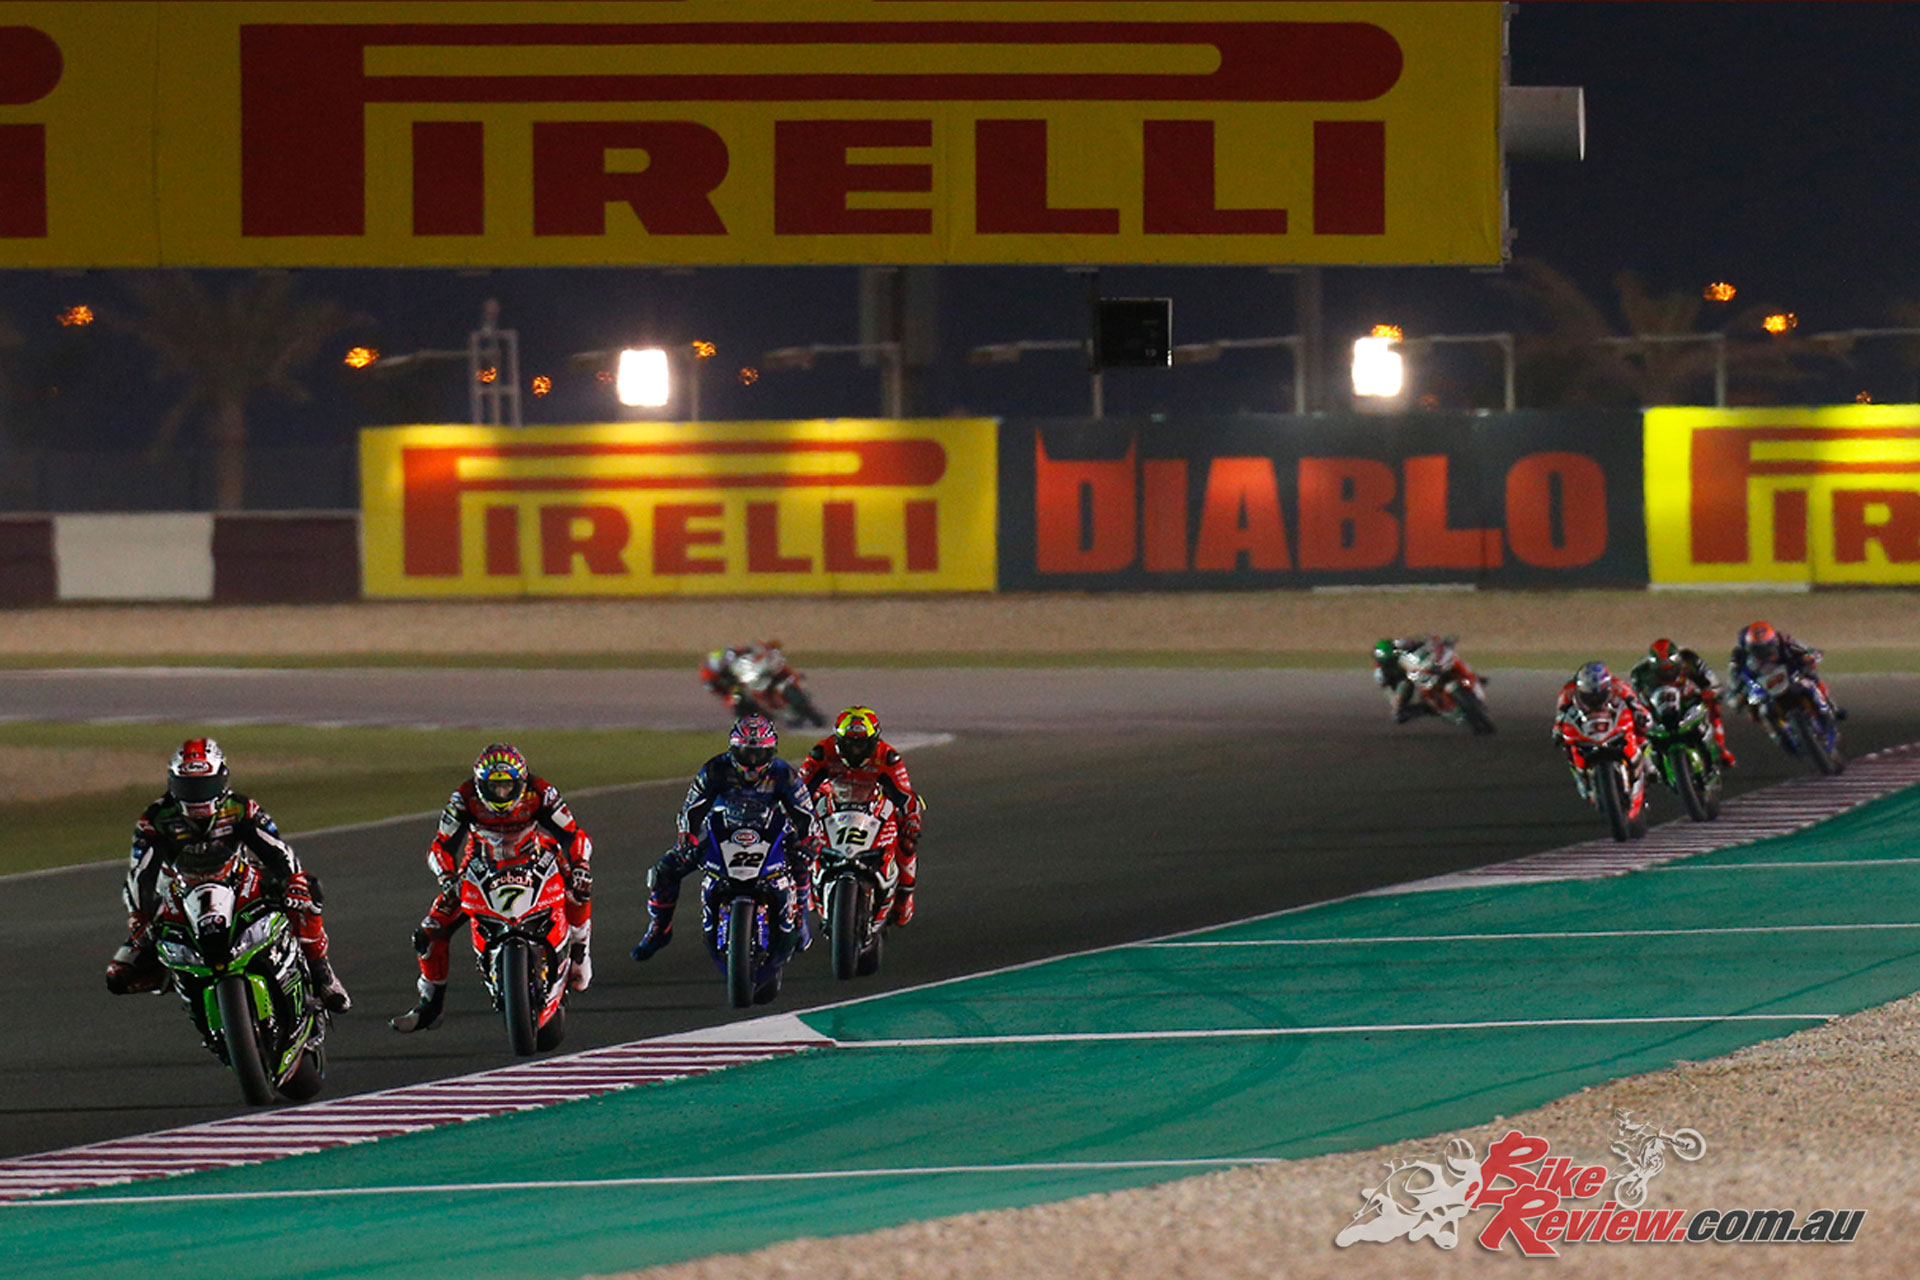 WorldSBK heads to Losail, Doha to settle the race for runner up and see if Rea can set any more records